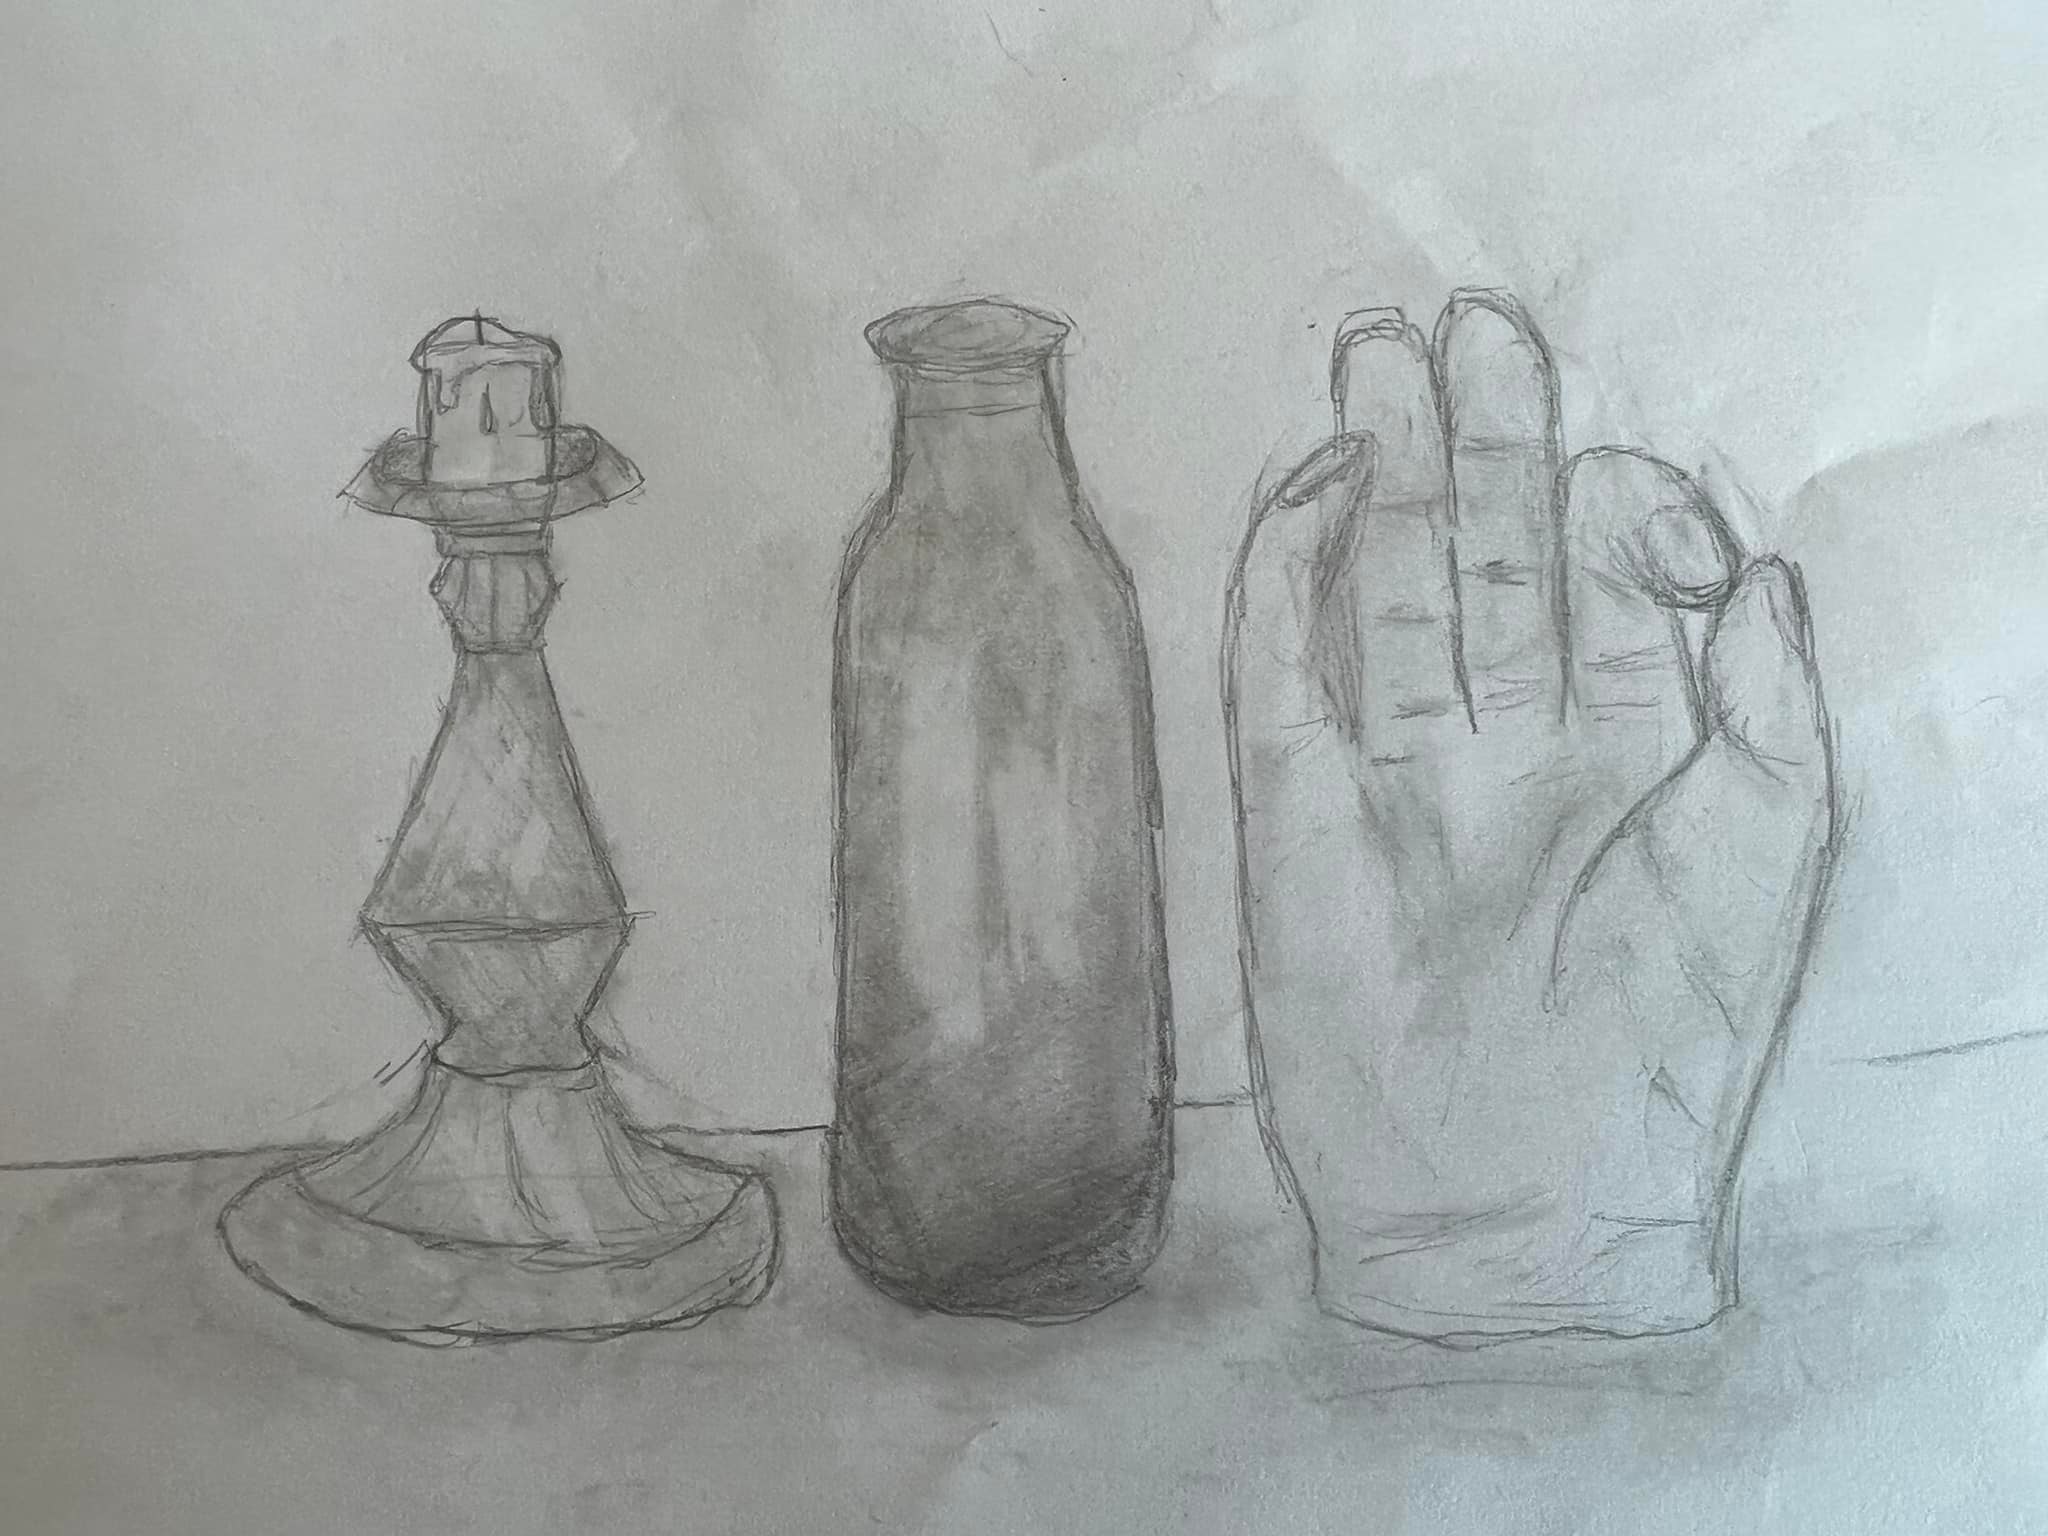 Pencil drawing of candle, bottle and hand on a table